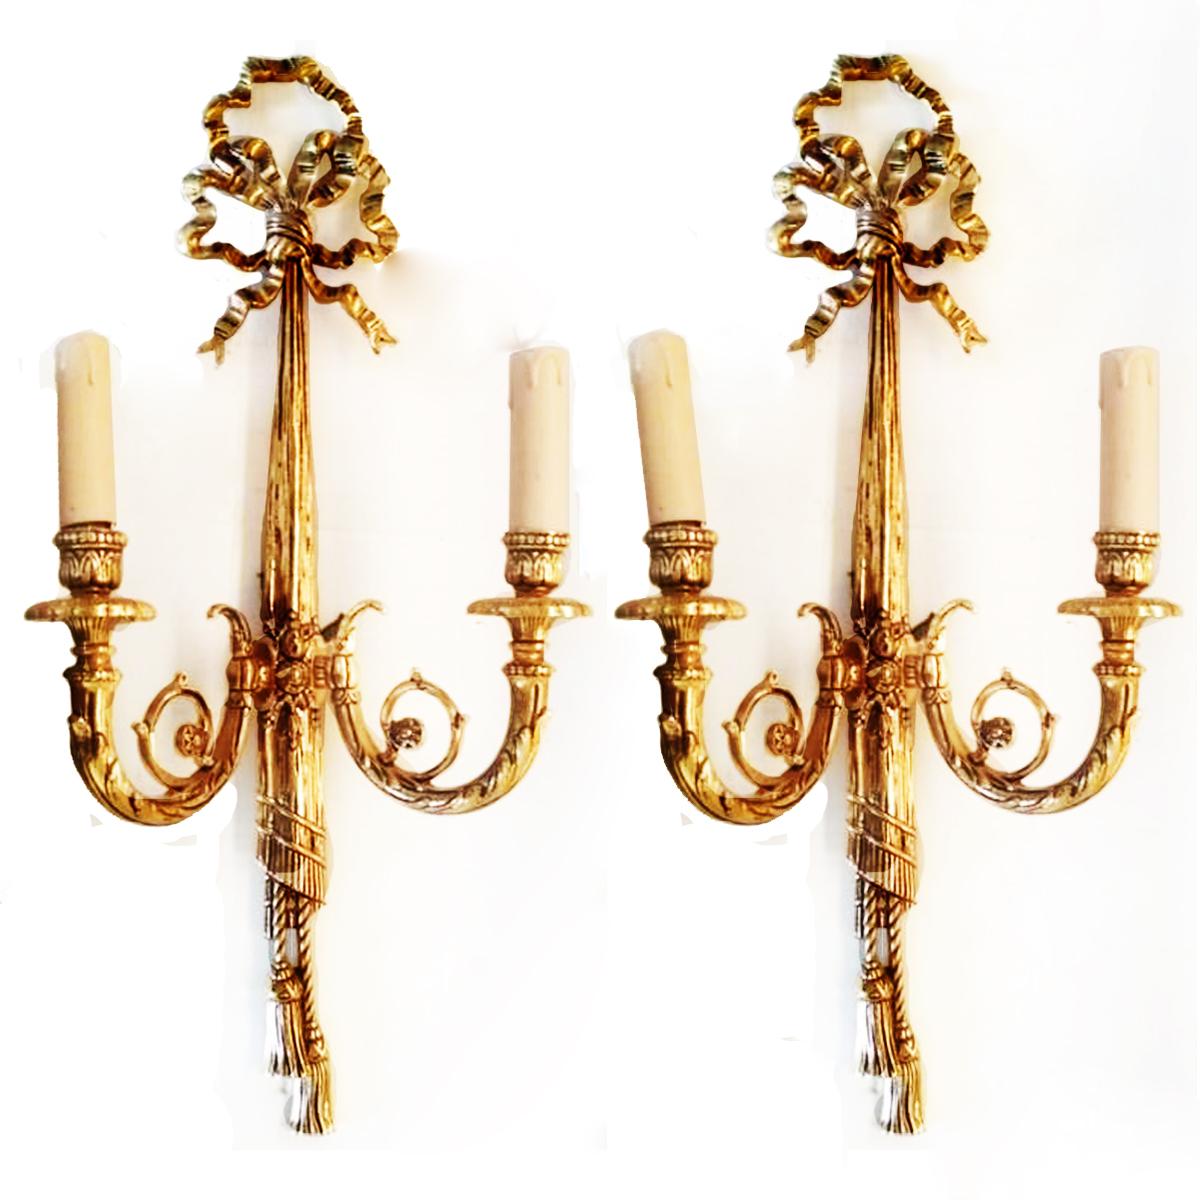 Midcentury Louis XVI style gilt bronze or brass two-light wall sconces

This elegant two-light Louis XVI style wall sconce. At the top there is a tassel, a typical element of Louis XVI period

They are in very good condition.
 
*For any questions